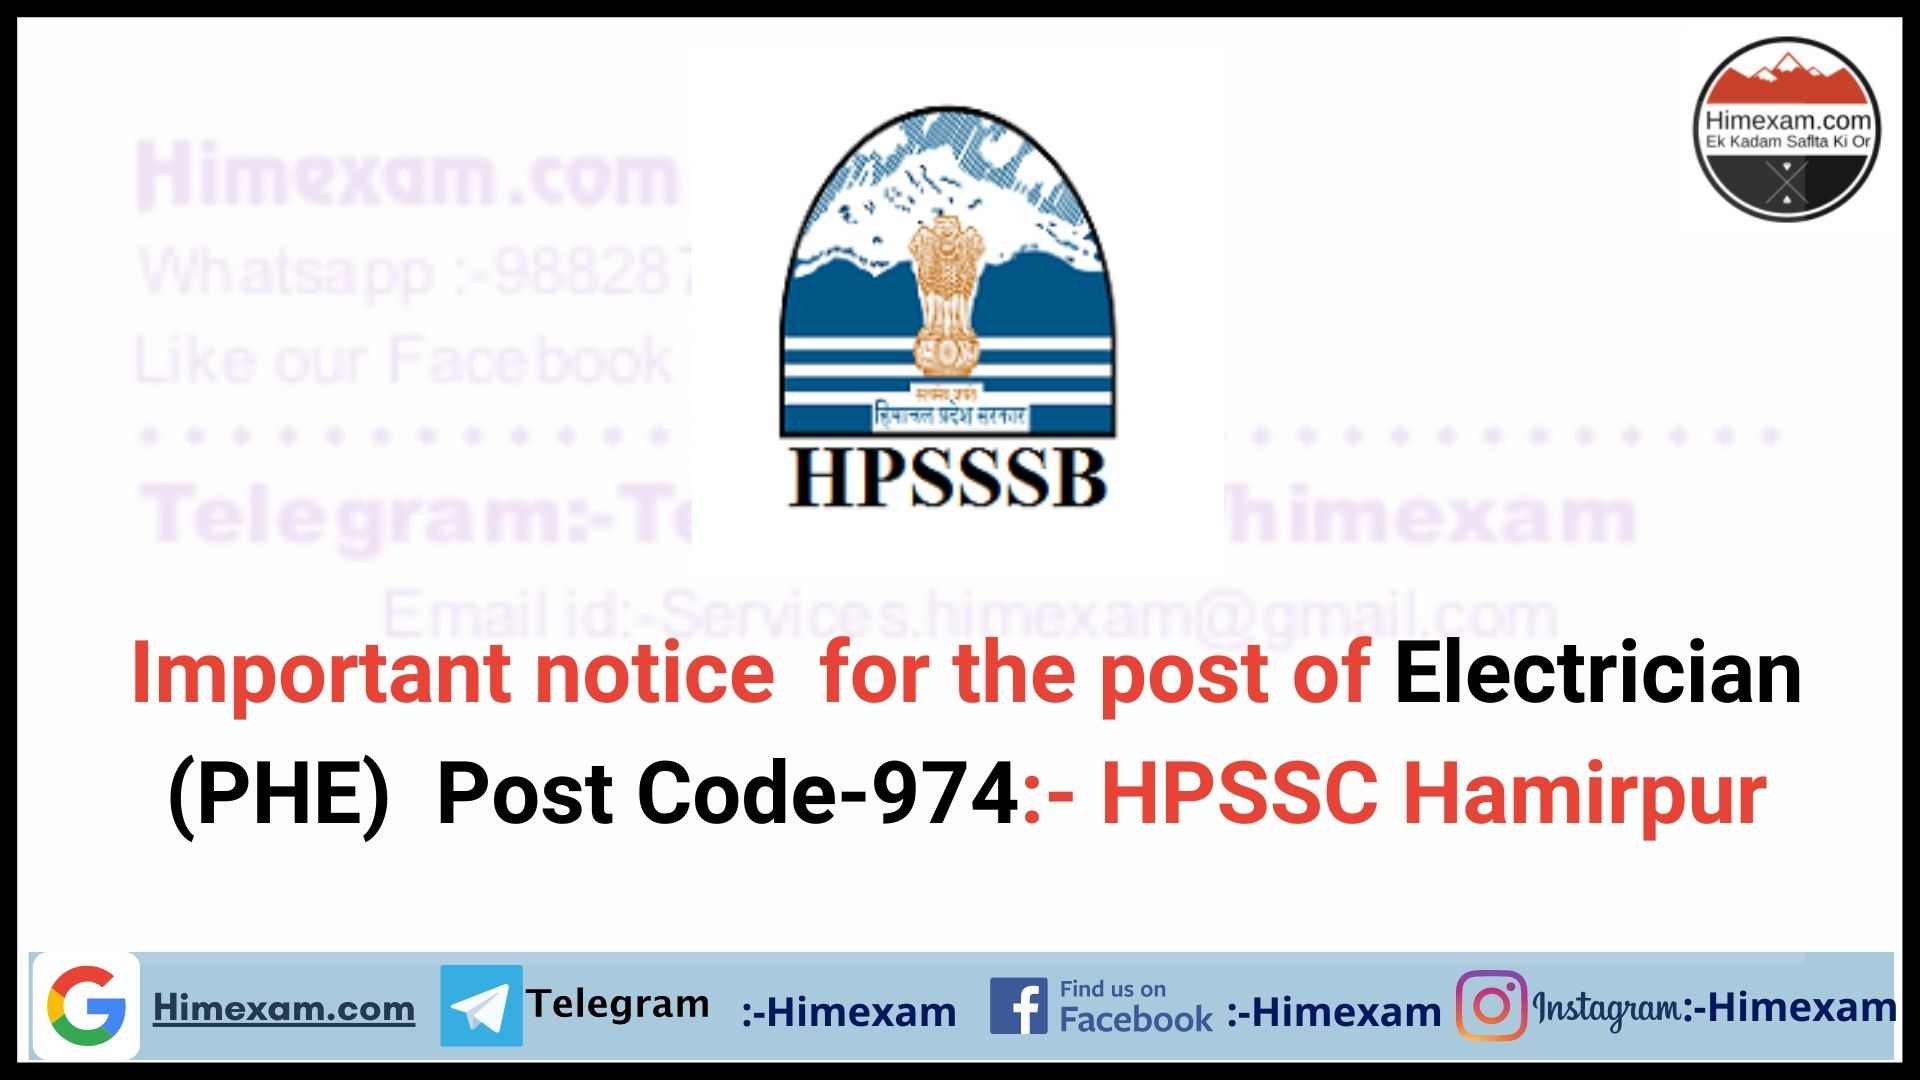 Important notice  for the post of Electrician (PHE)  Post Code-974:- HPSSC Hamirpur